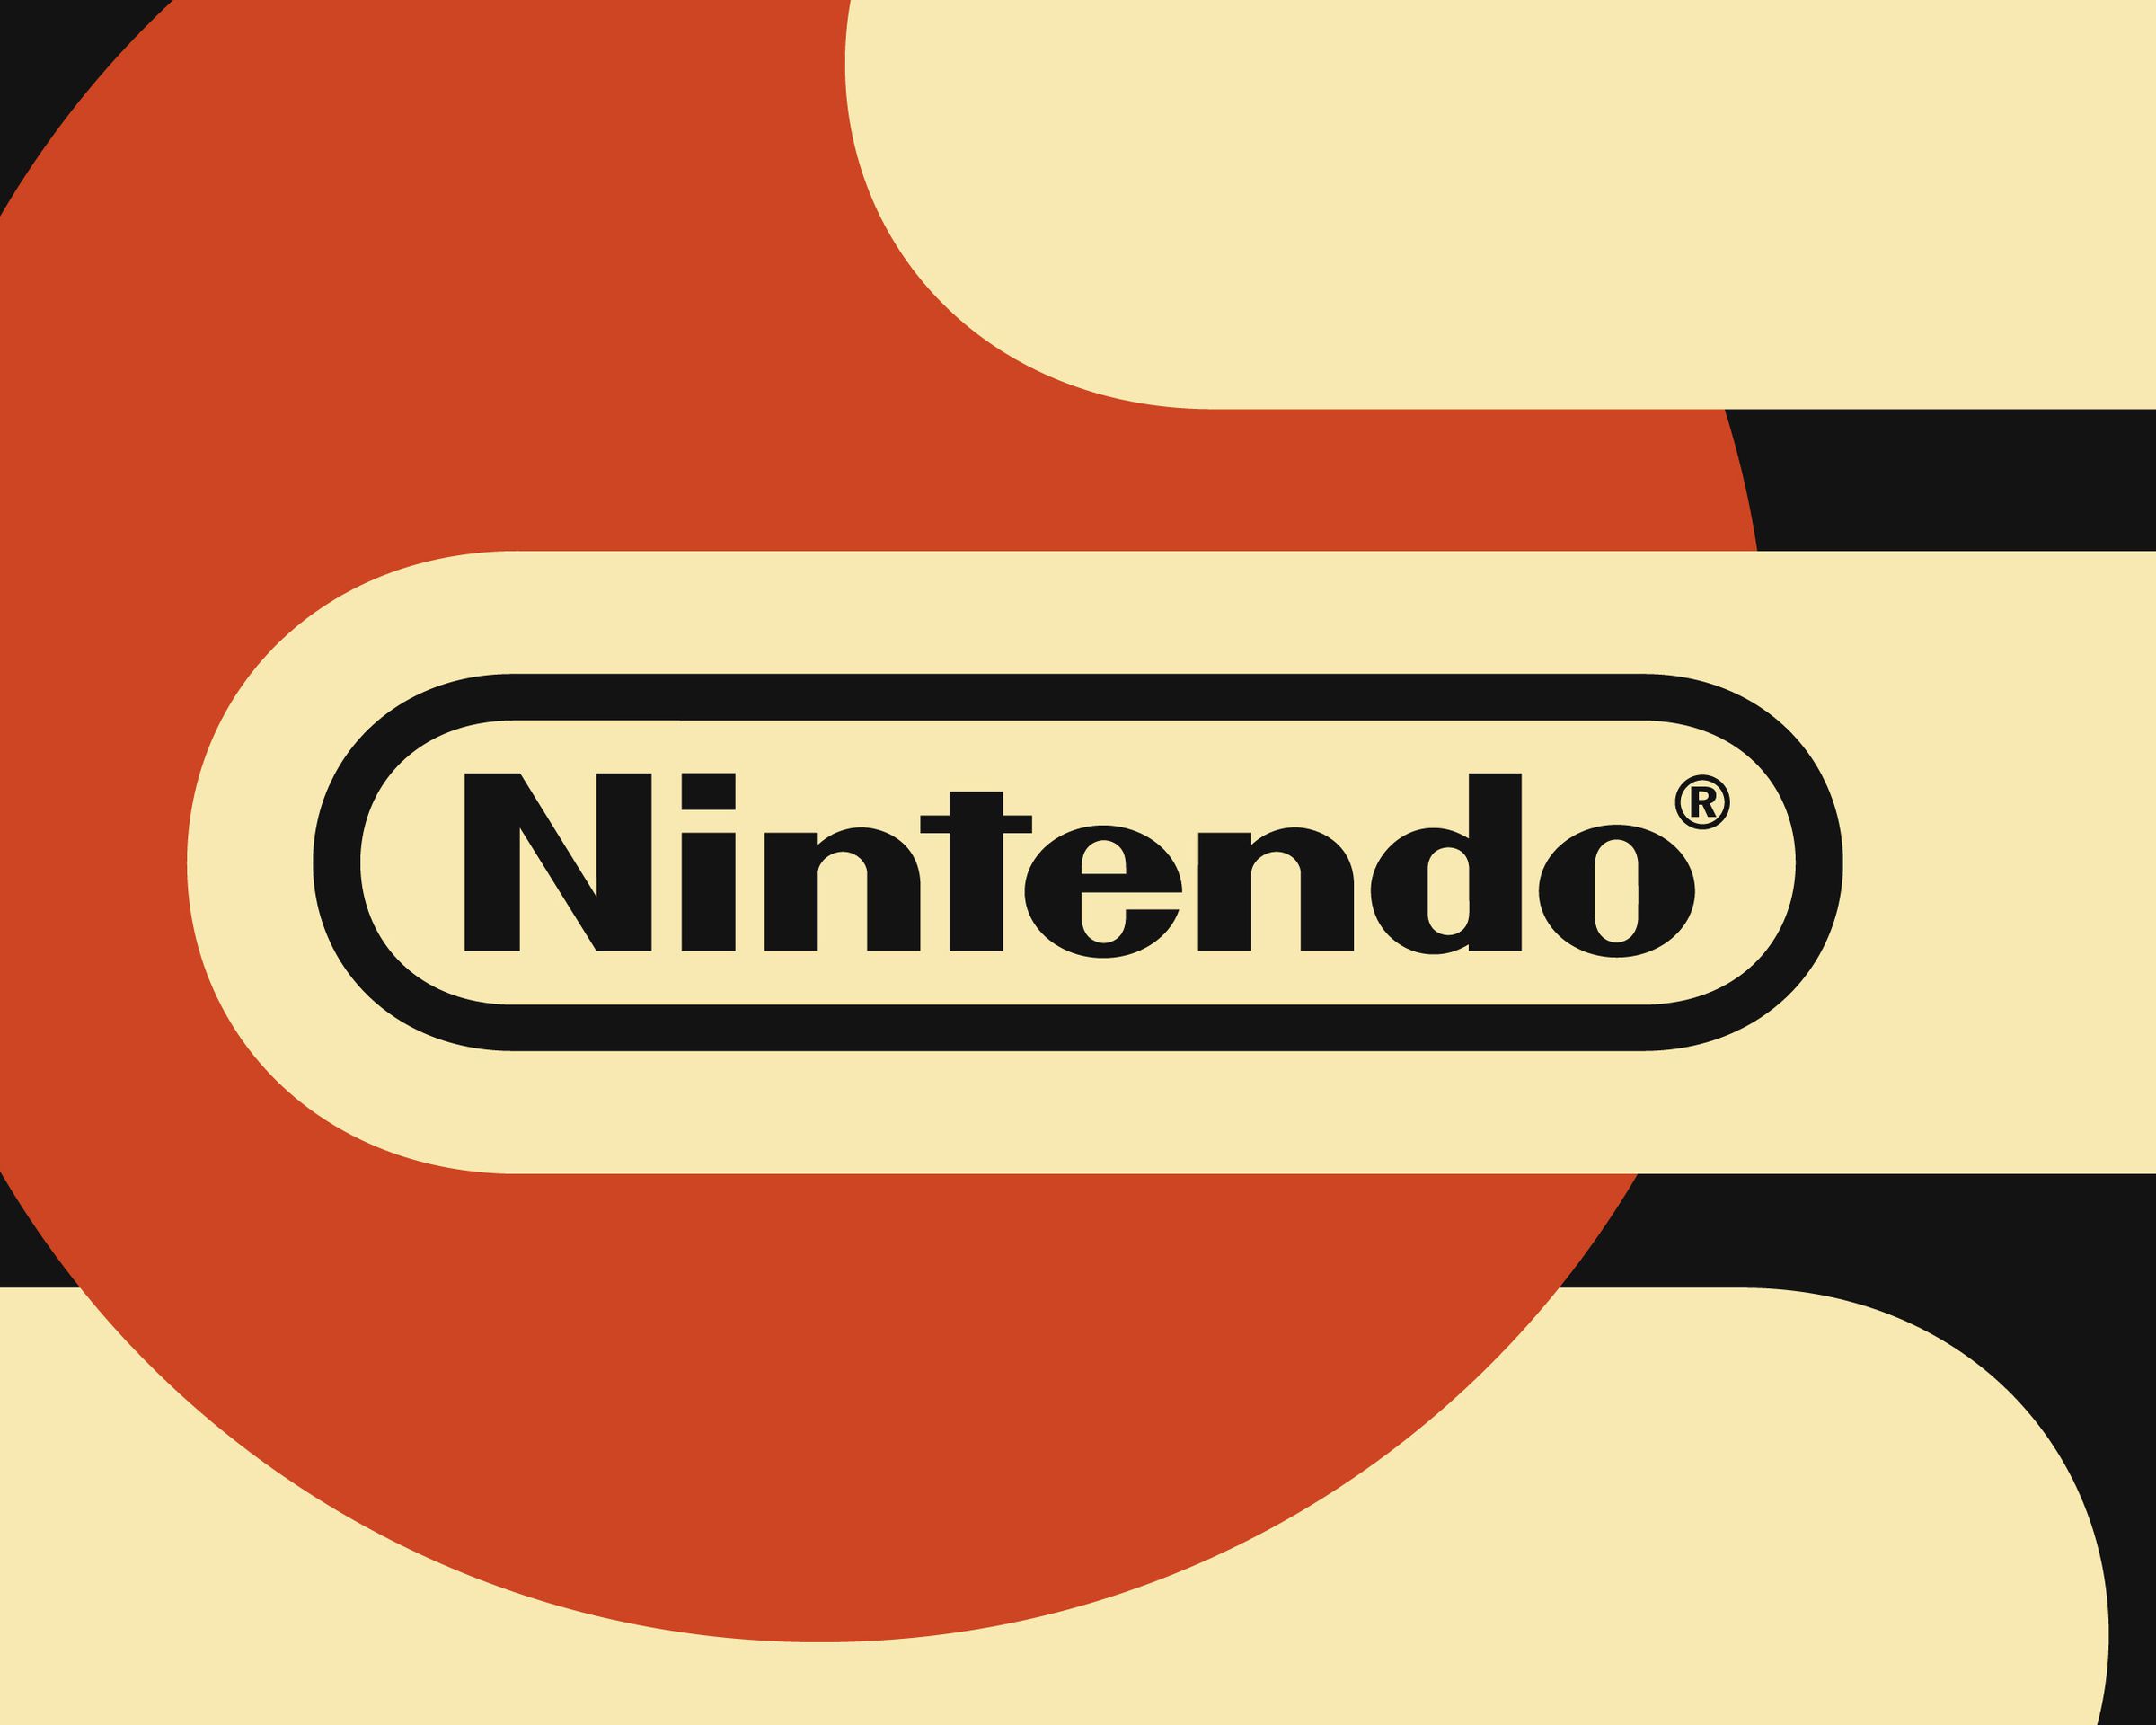 The Nintendo logo sits inside a black, red, and cream-colored design.